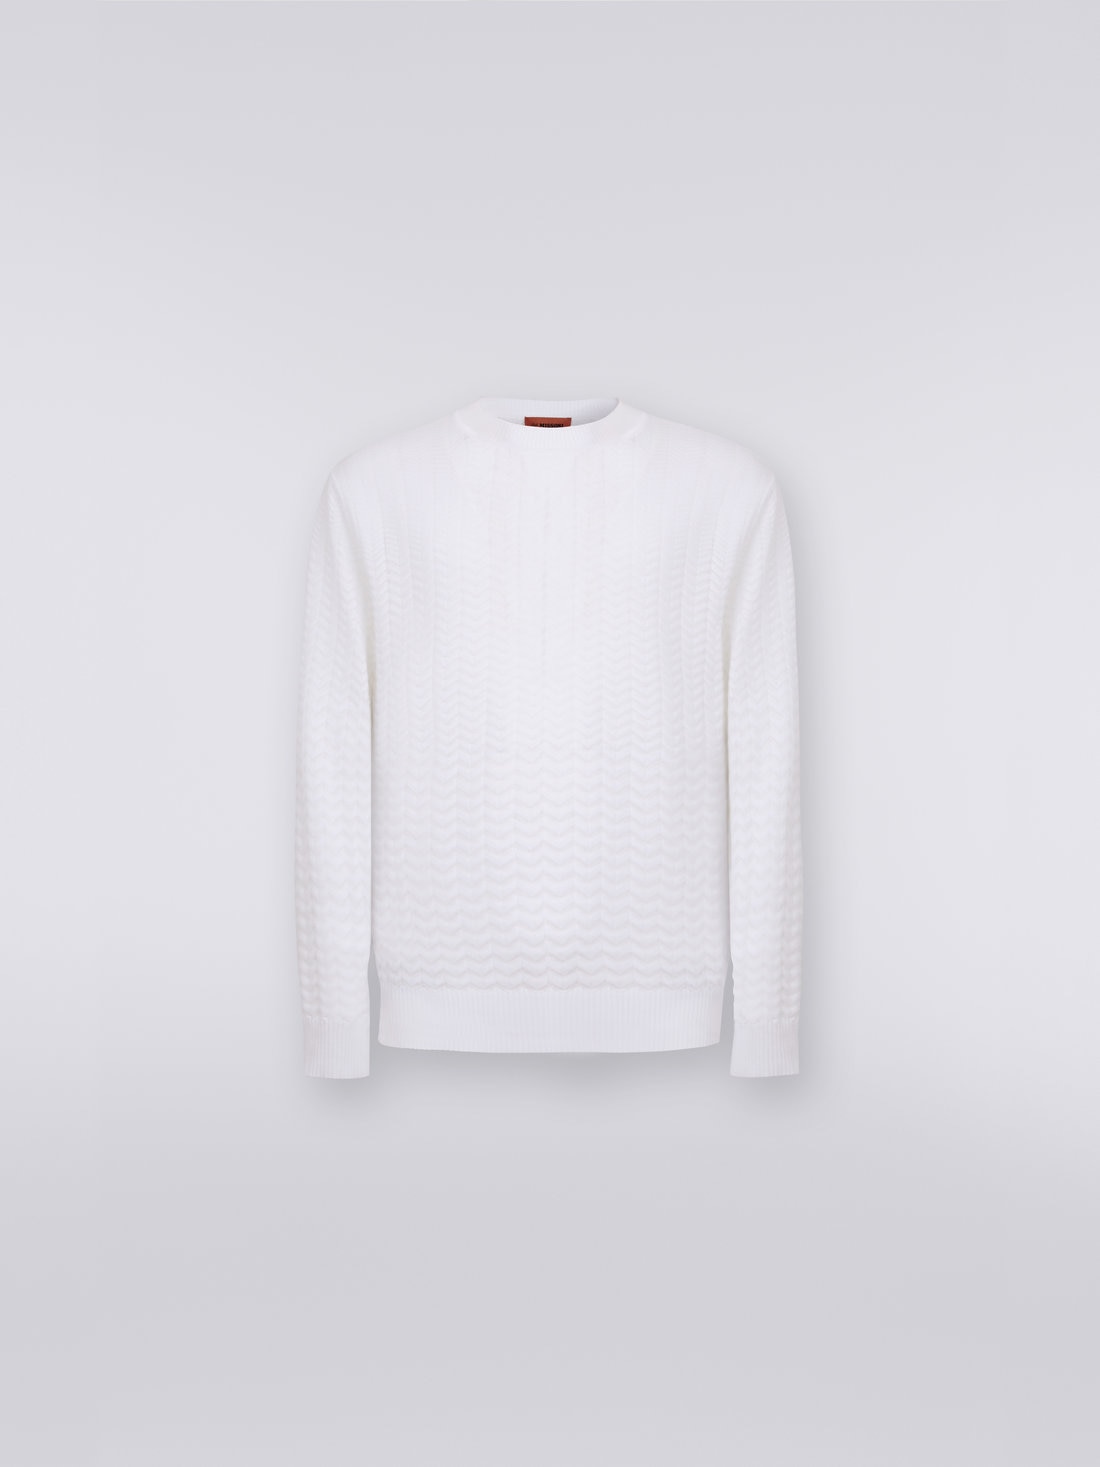 Cotton and viscose crew-neck jumper with chevron inserts, White  - US23SN07BK021TS0177 - 0